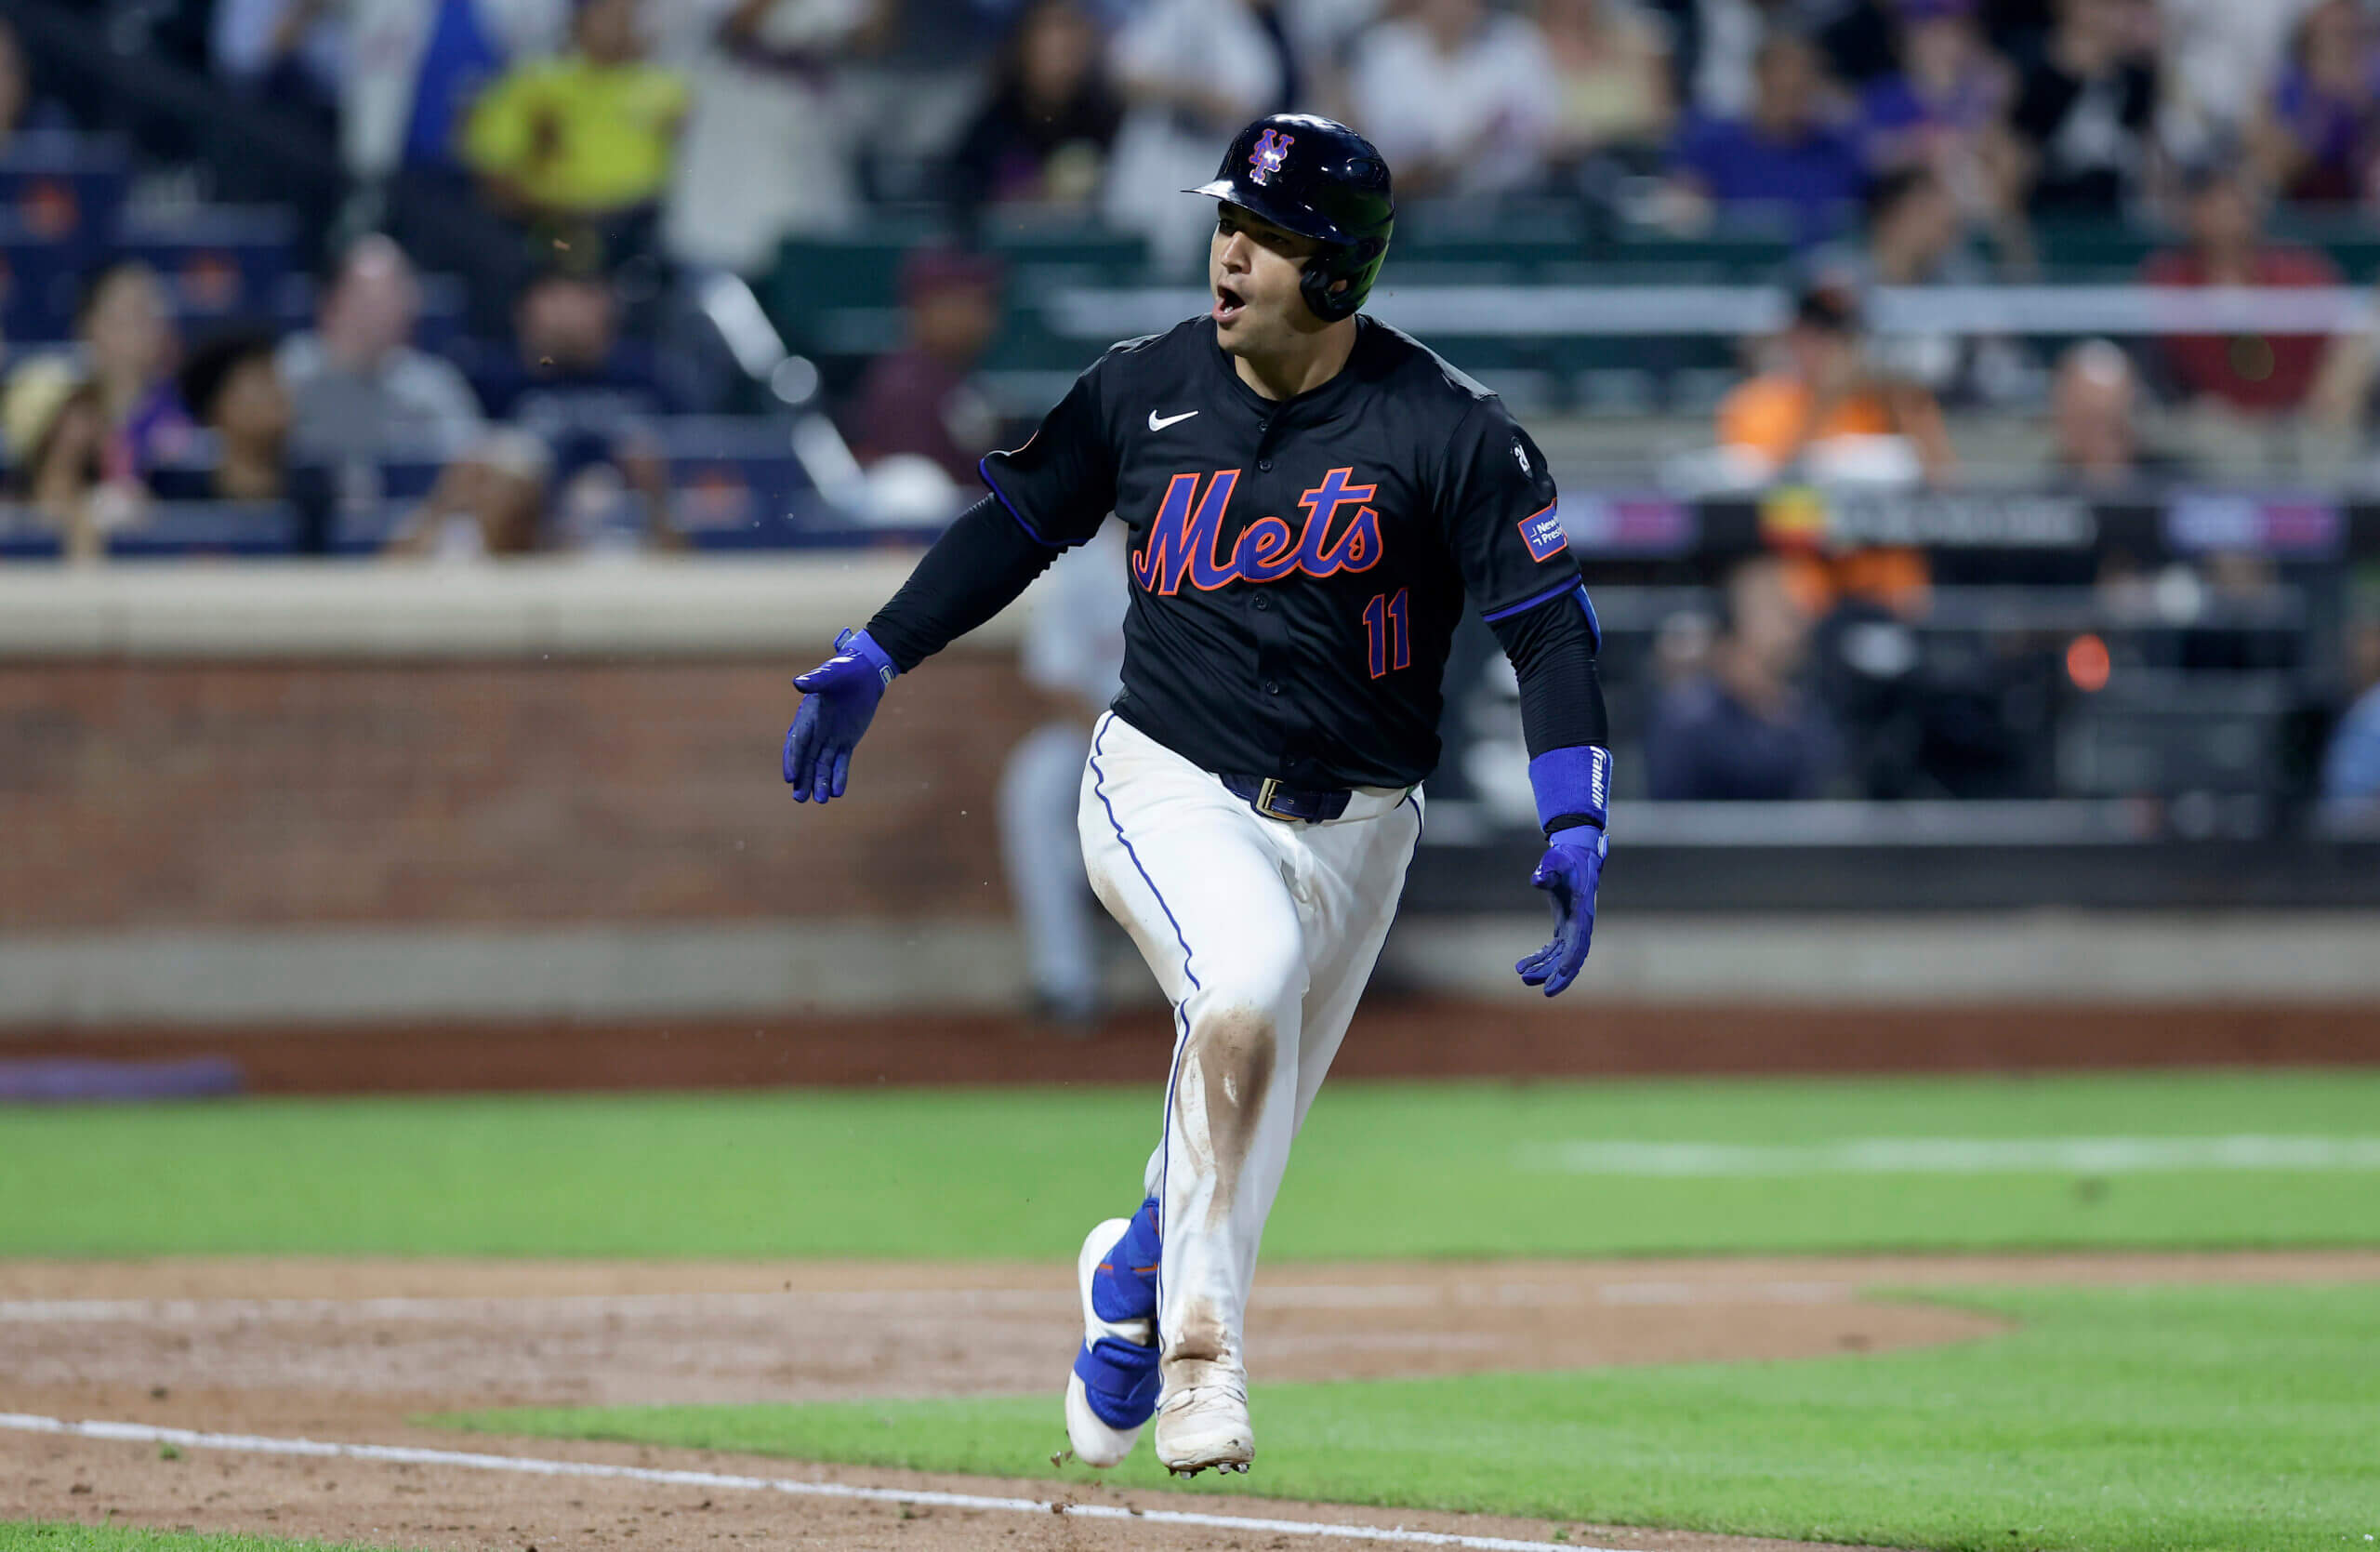 Three Mets takeaways on the first half of the season